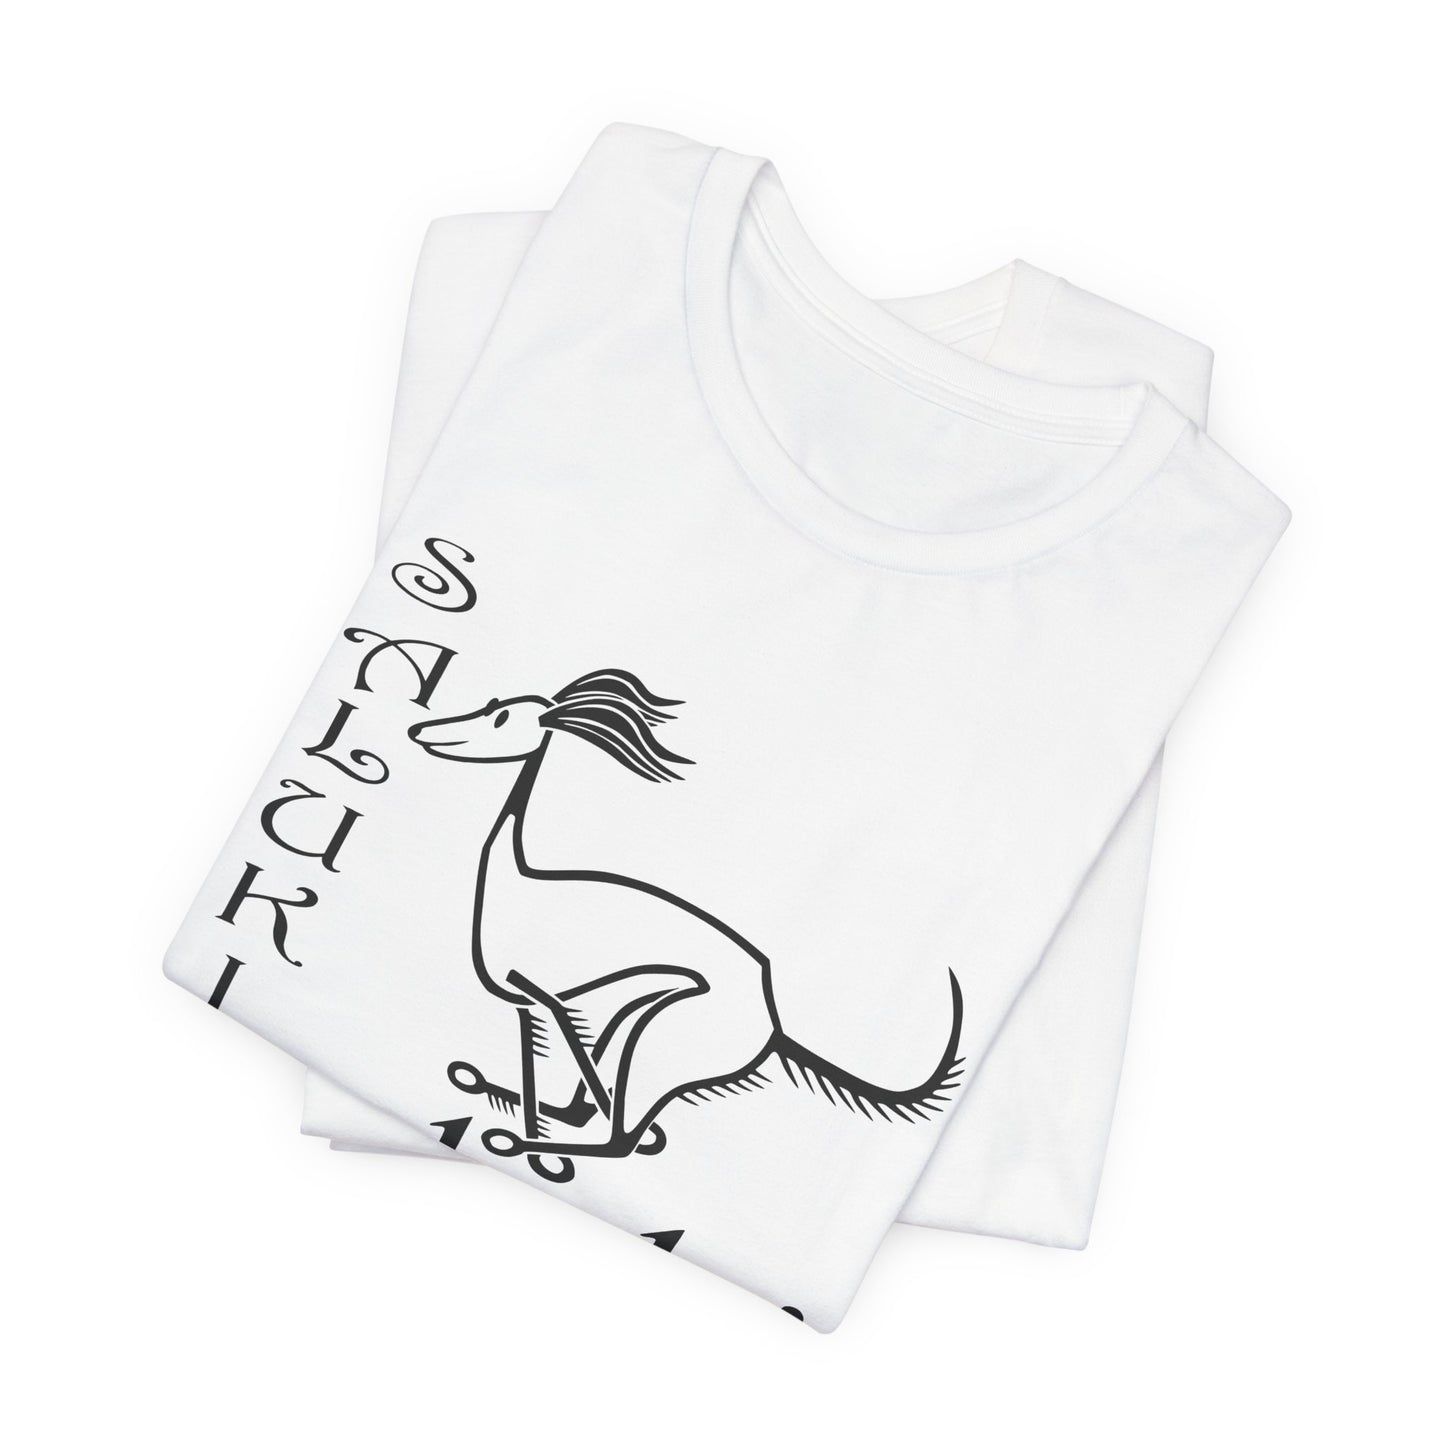 Unisex Jersey Short Sleeve Tee in white featuring a cartoon style Saluki dog breed galloping.